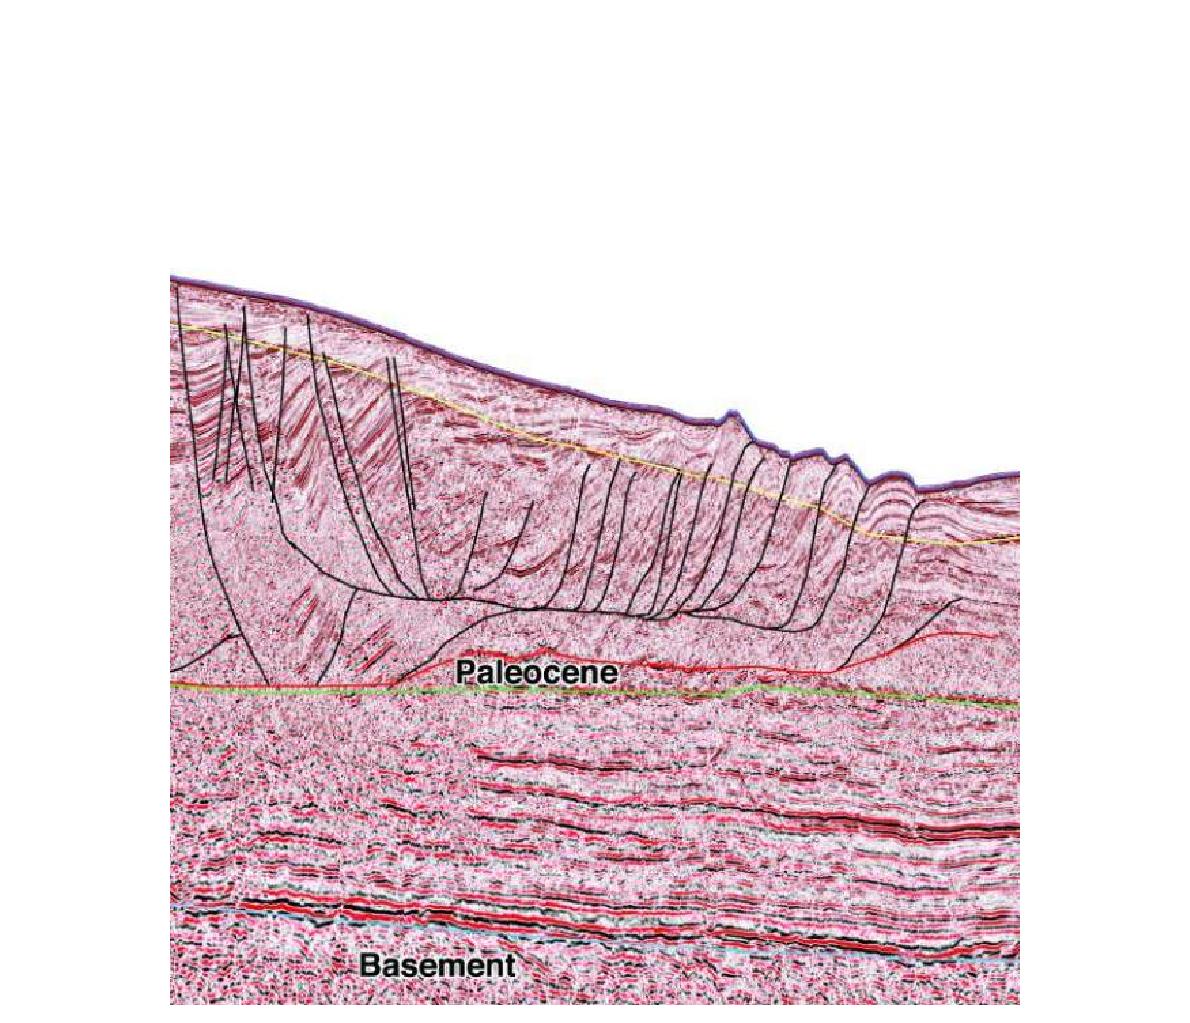 A prestack time-migrated seismic section of Ruvuma Basin, showing numerous toe thrusts. The Toe thrusts act as a migration pathway for the gas generated in the Jurssic to Cretaceous source rocks